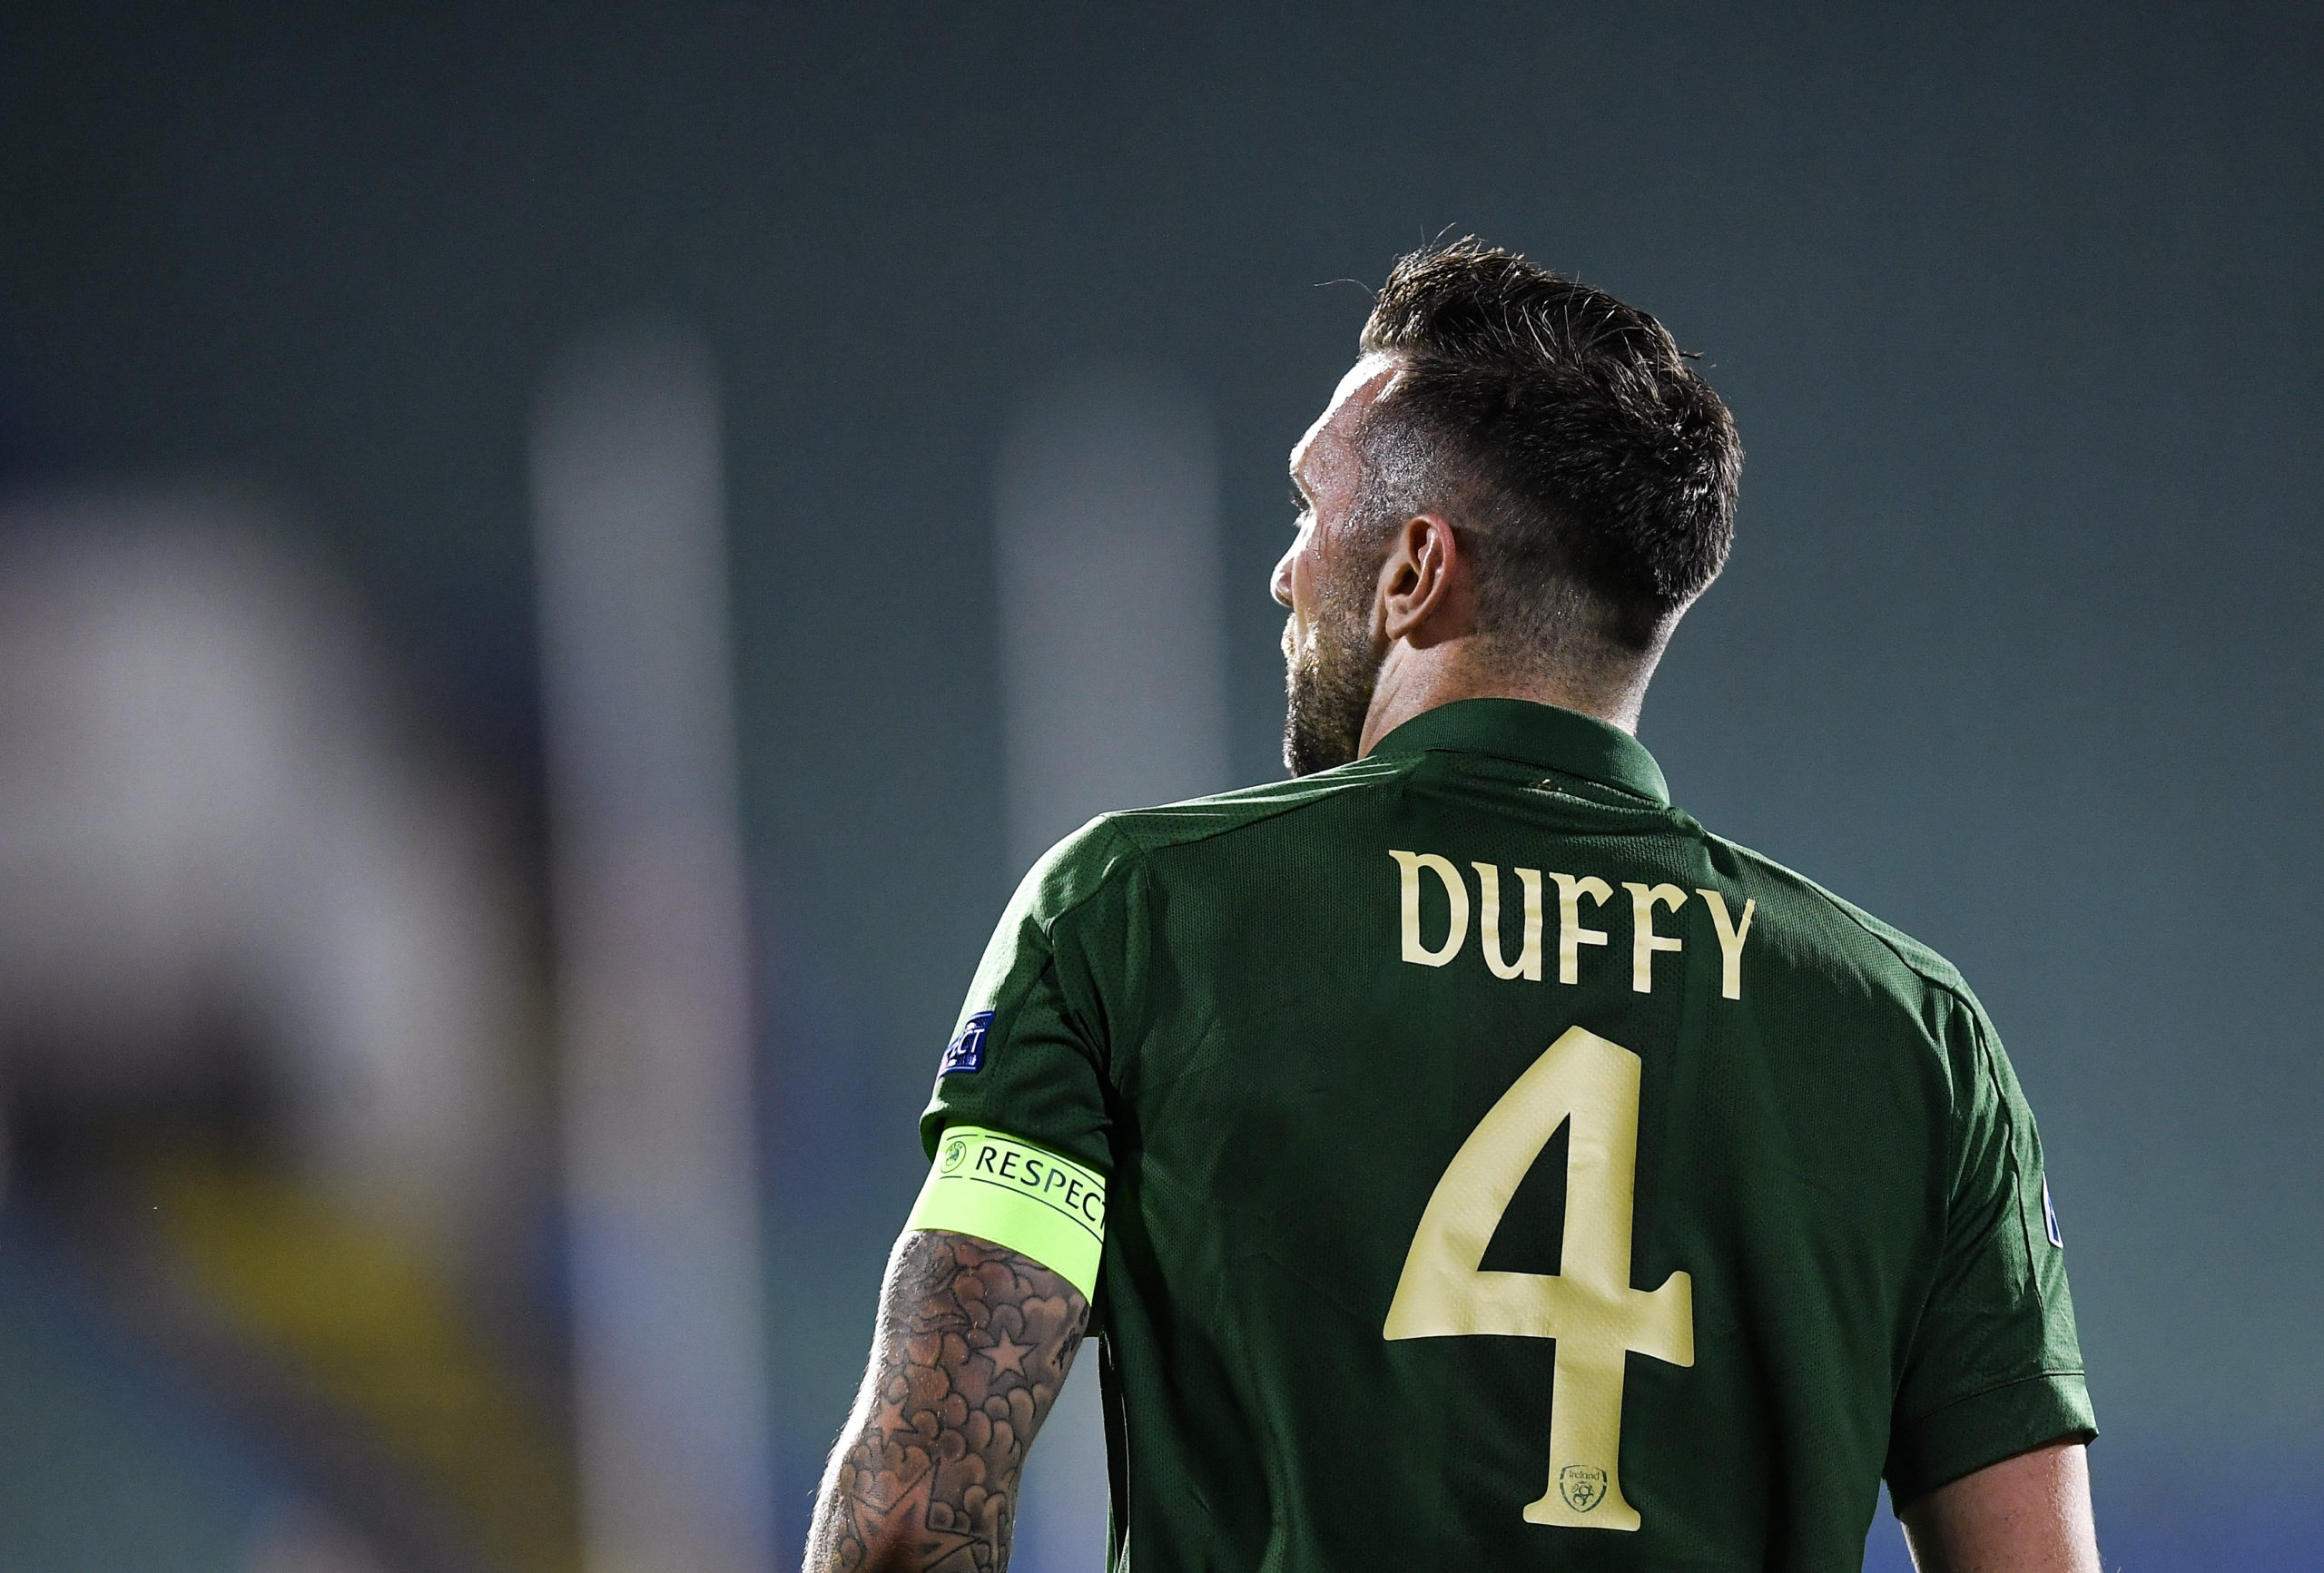 In defence of Shane Duffy; his Celtic form isn't good enough but 2020 hasn't been kind to him